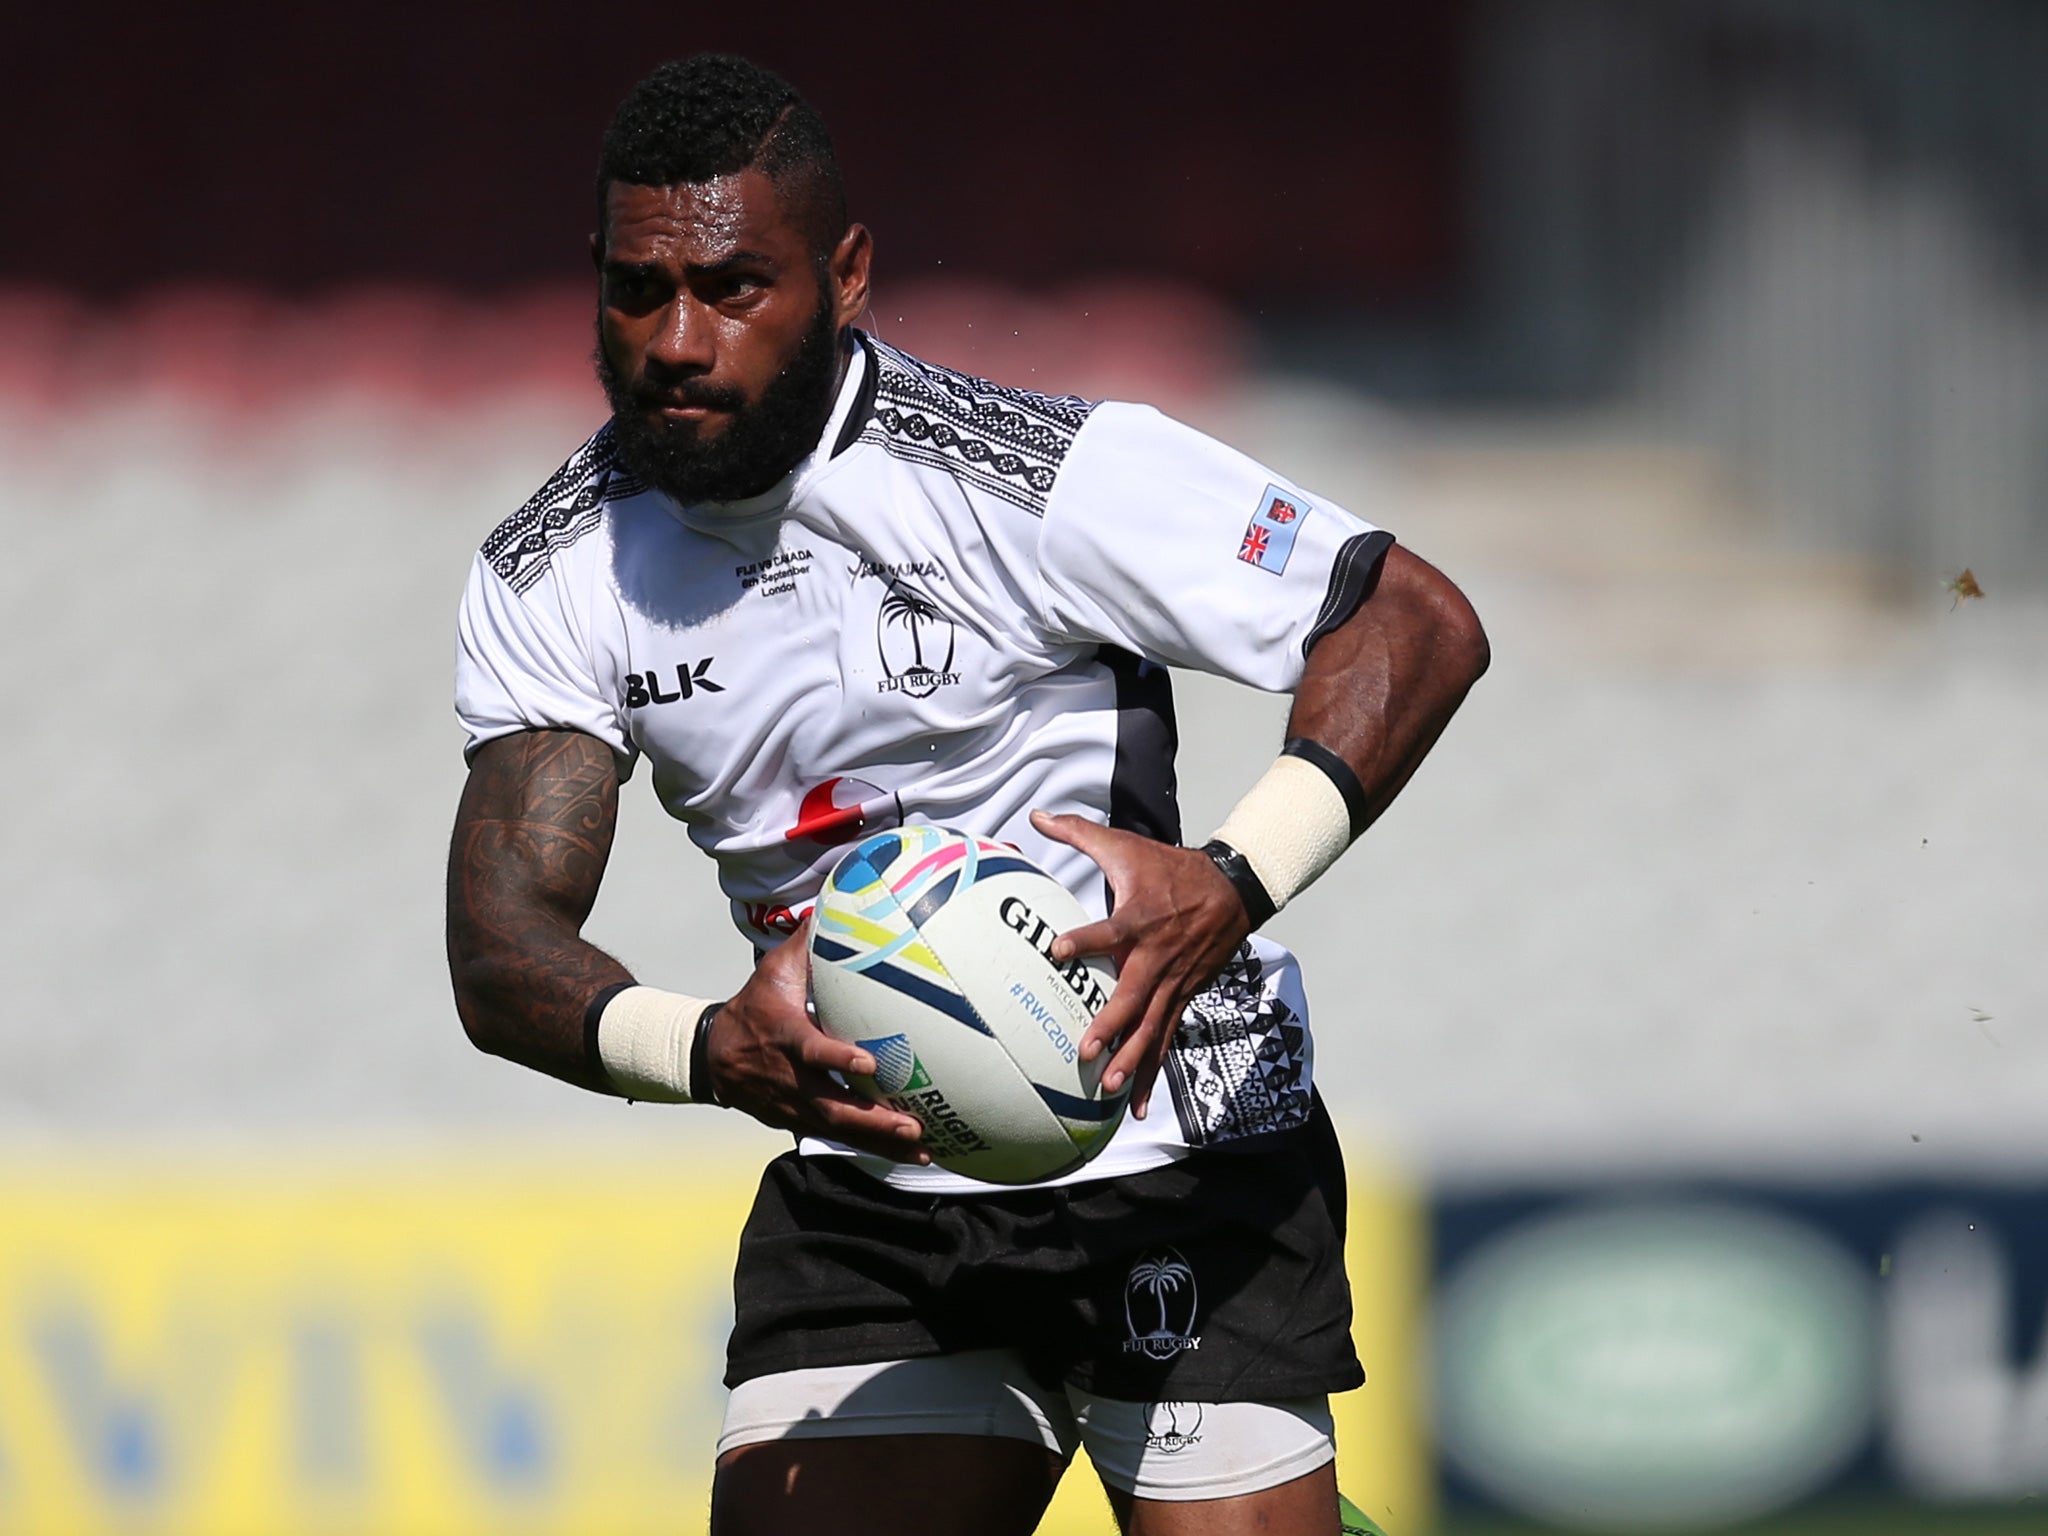 Scrum-half Niko Matawalu says Fiji have gained in confidence since qualifying to face England and Wales in their World Cup group